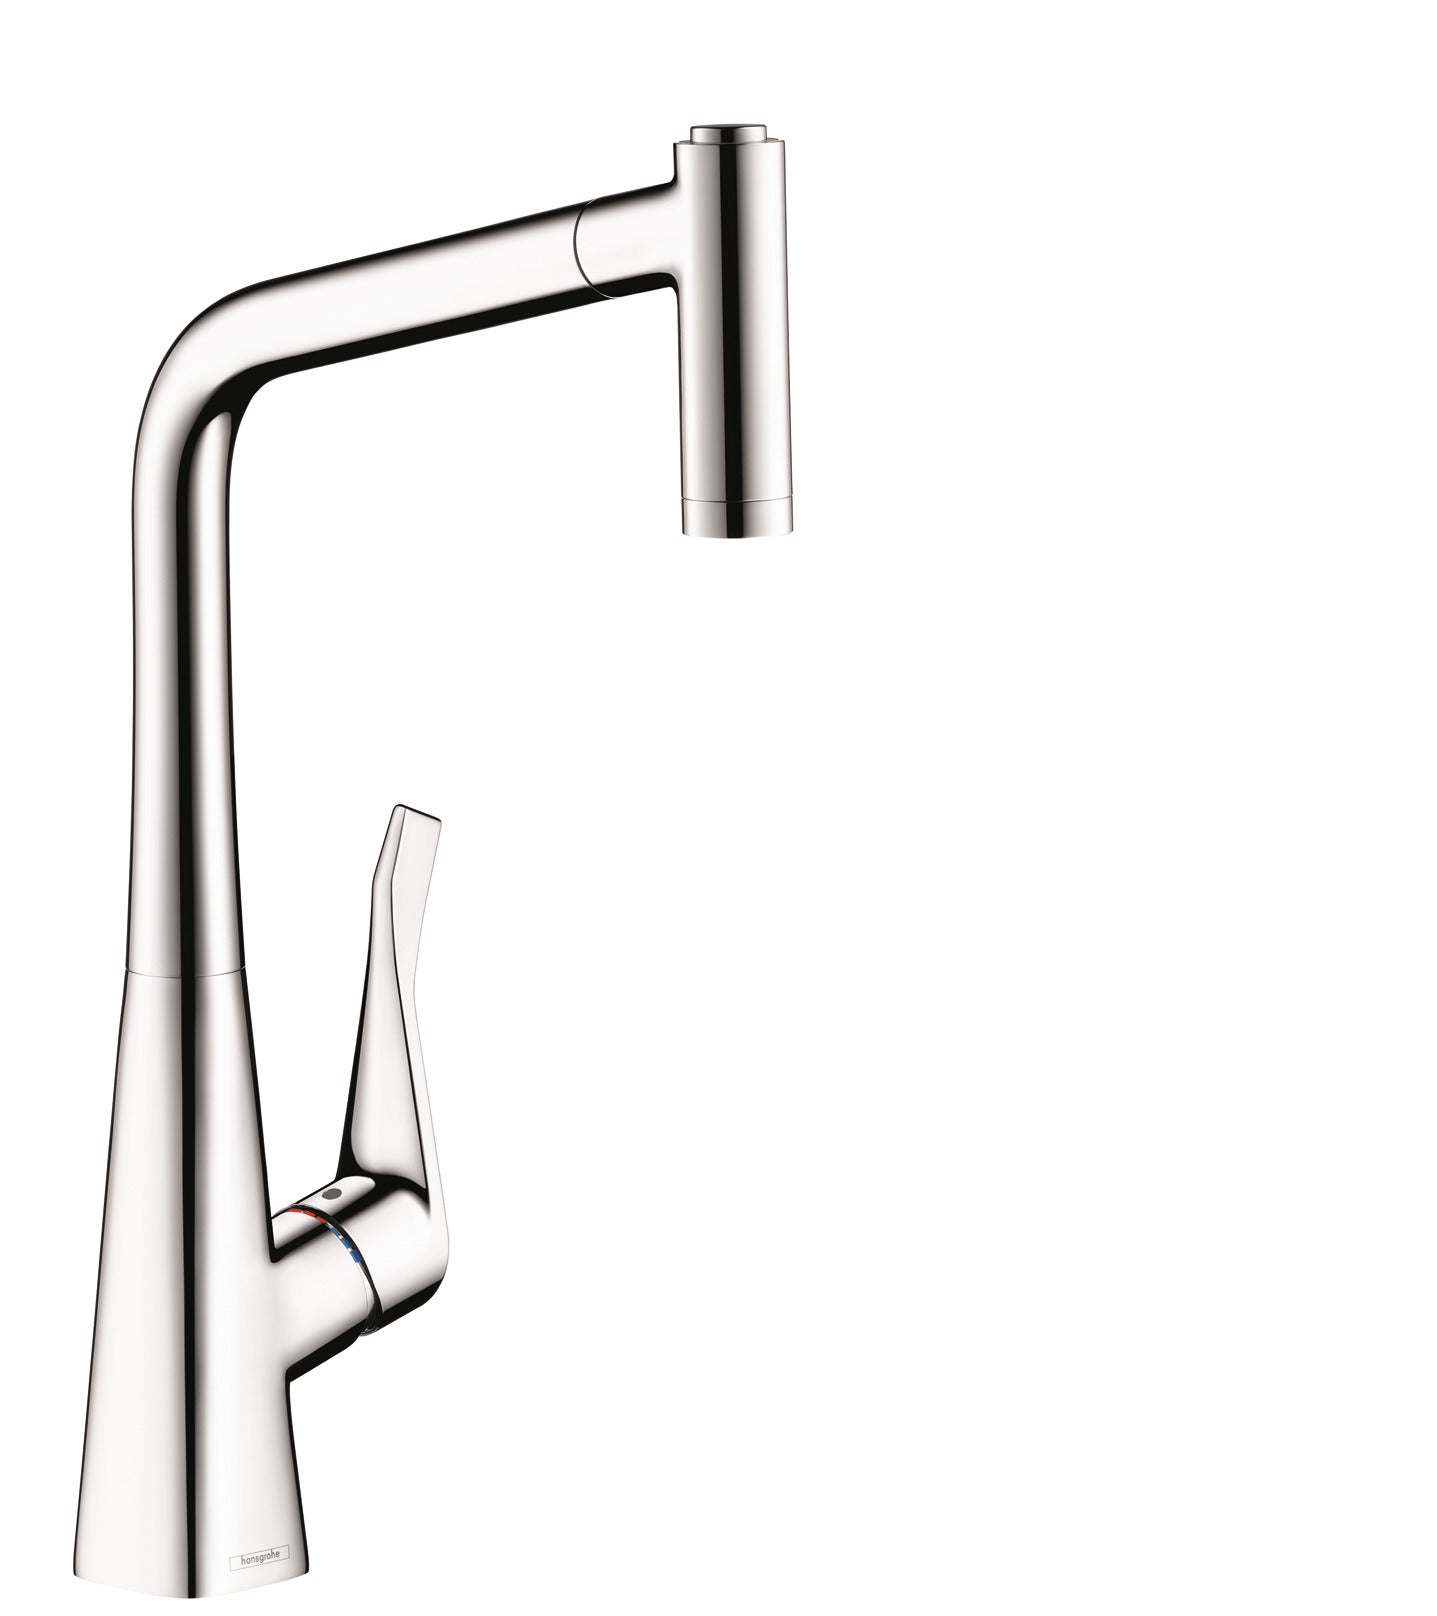 HANSGROHE 14820001 Metris HighArc Kitchen Faucet, 2-Spray Pull-Out, 1.75 GPM in Chrome